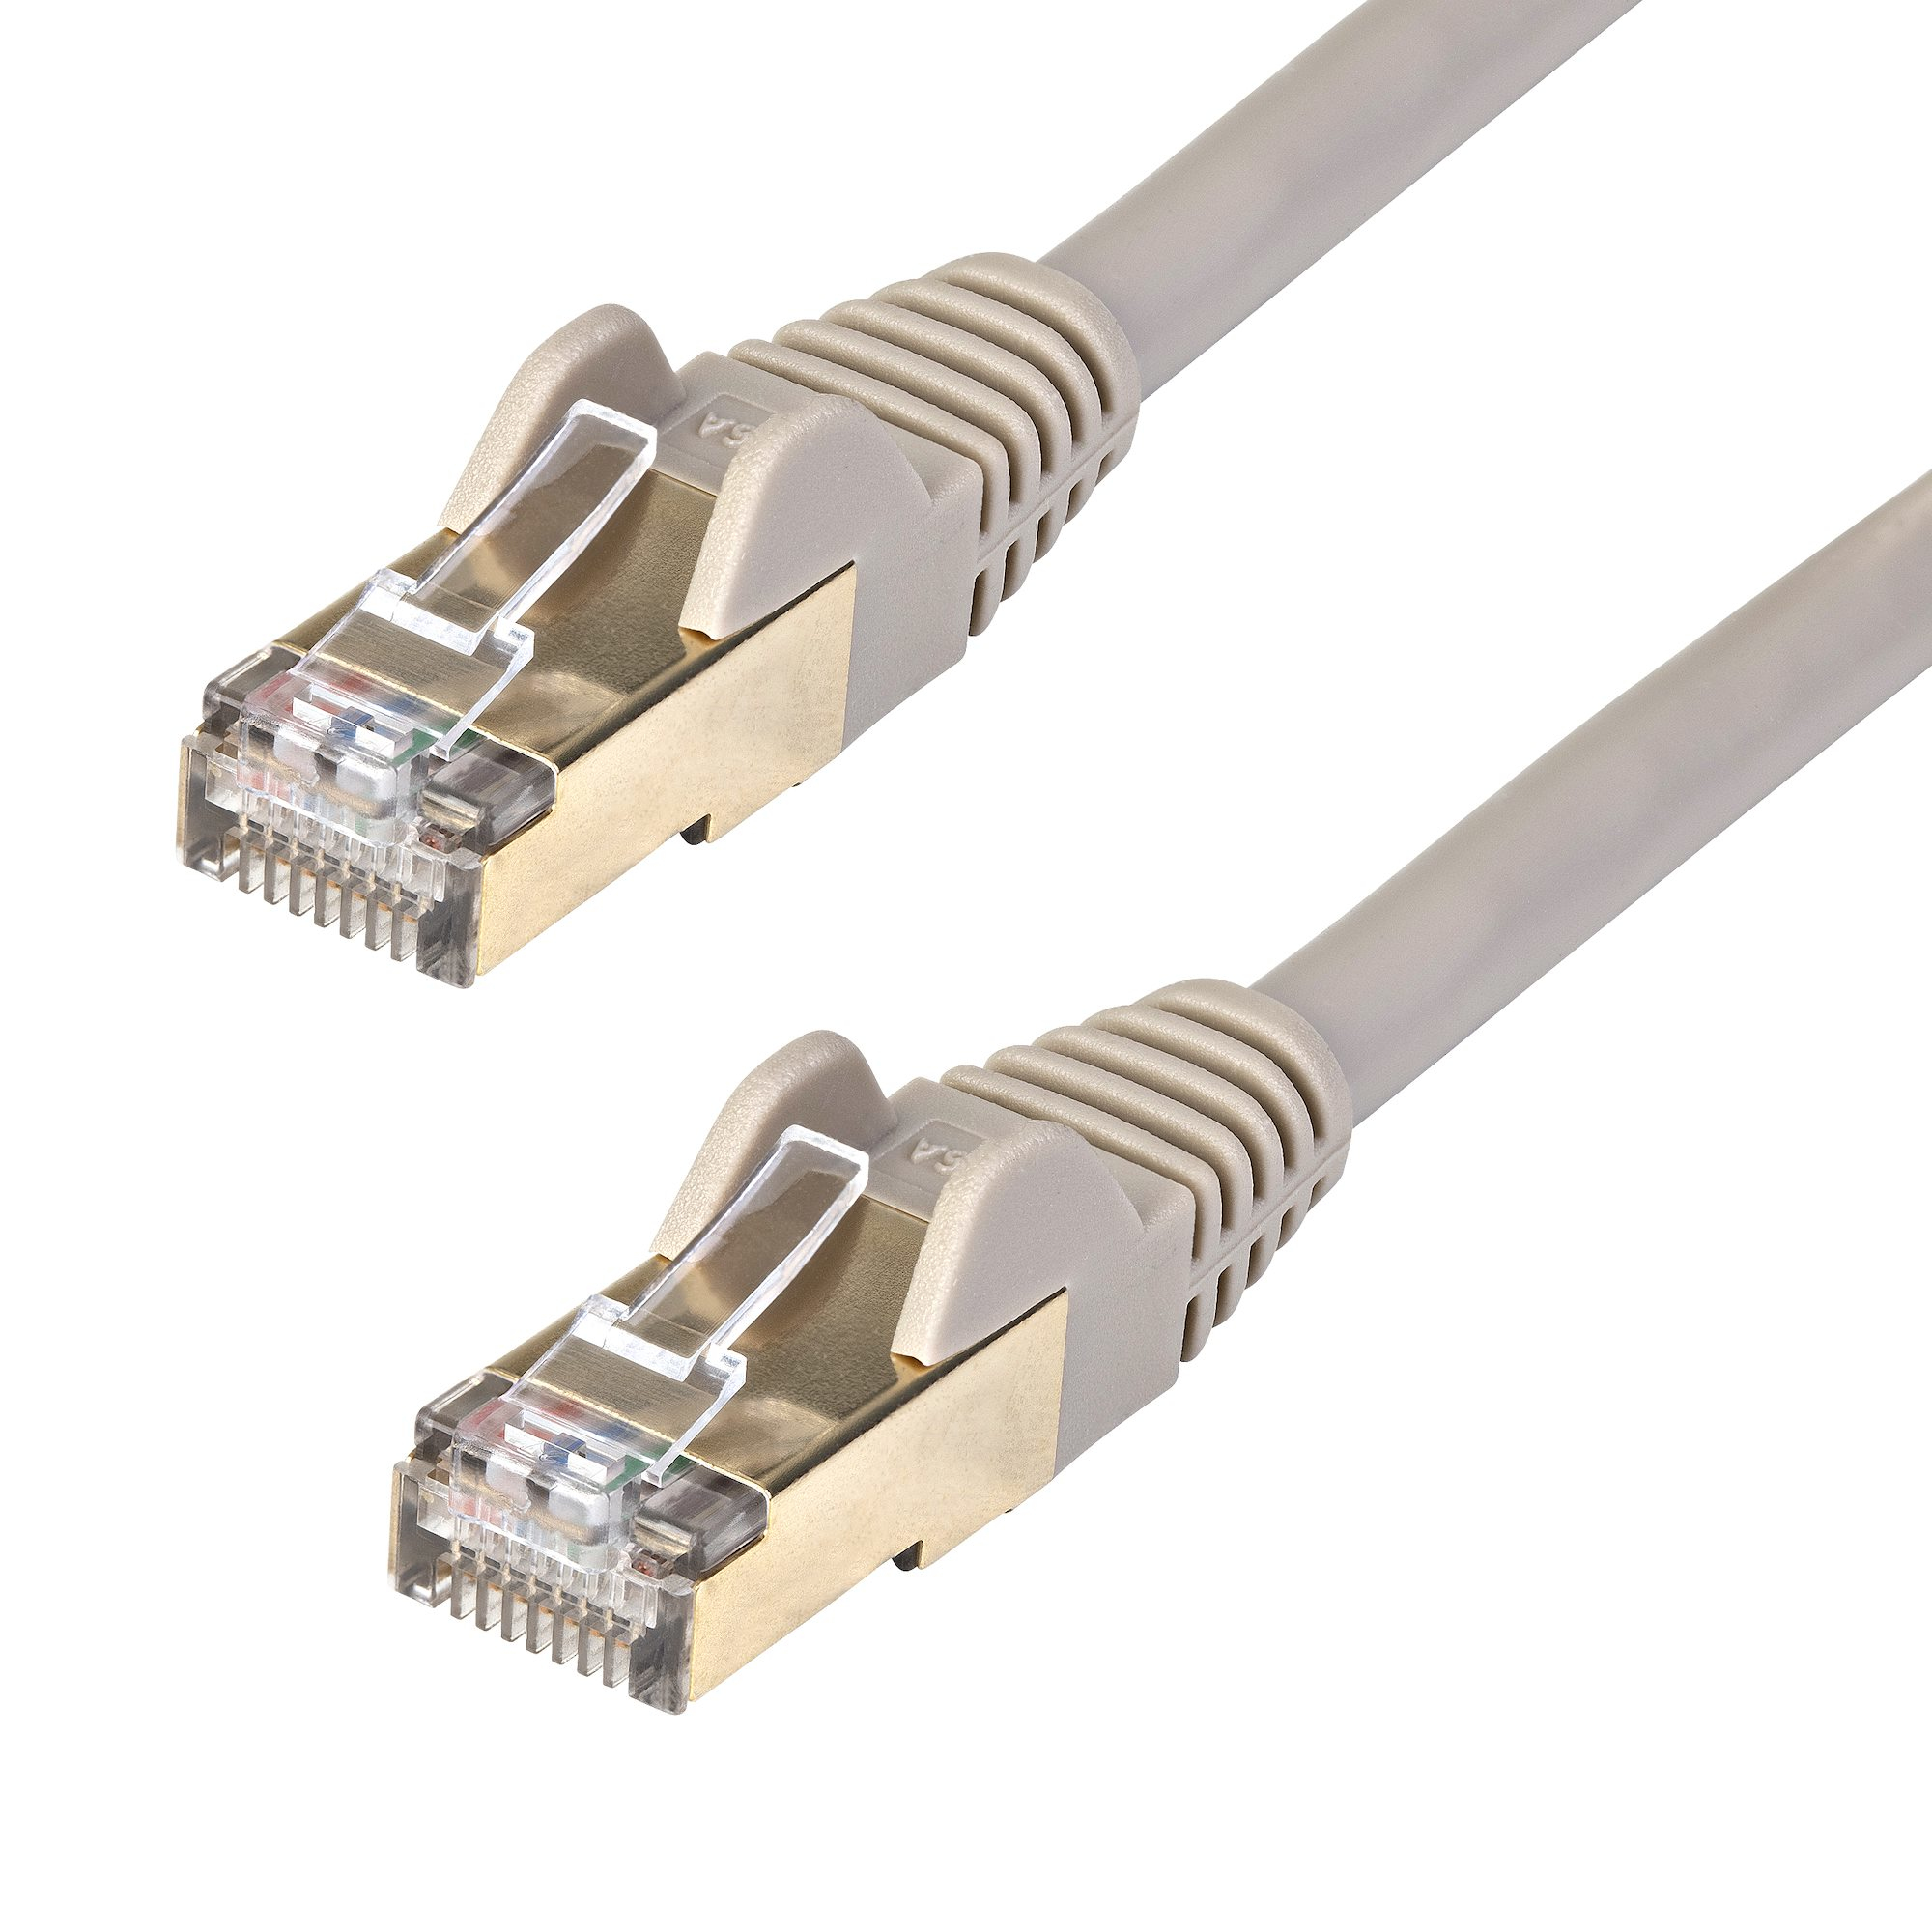 StarTech.com 10m CAT6a Ethernet Cable - 10 Gigabit Shielded Snagless RJ45 100W PoE Patch Cord - 10GbE STP Network Cable w/Strain Relief - Grey Fluke Tested/Wiring is UL Certified/TIA